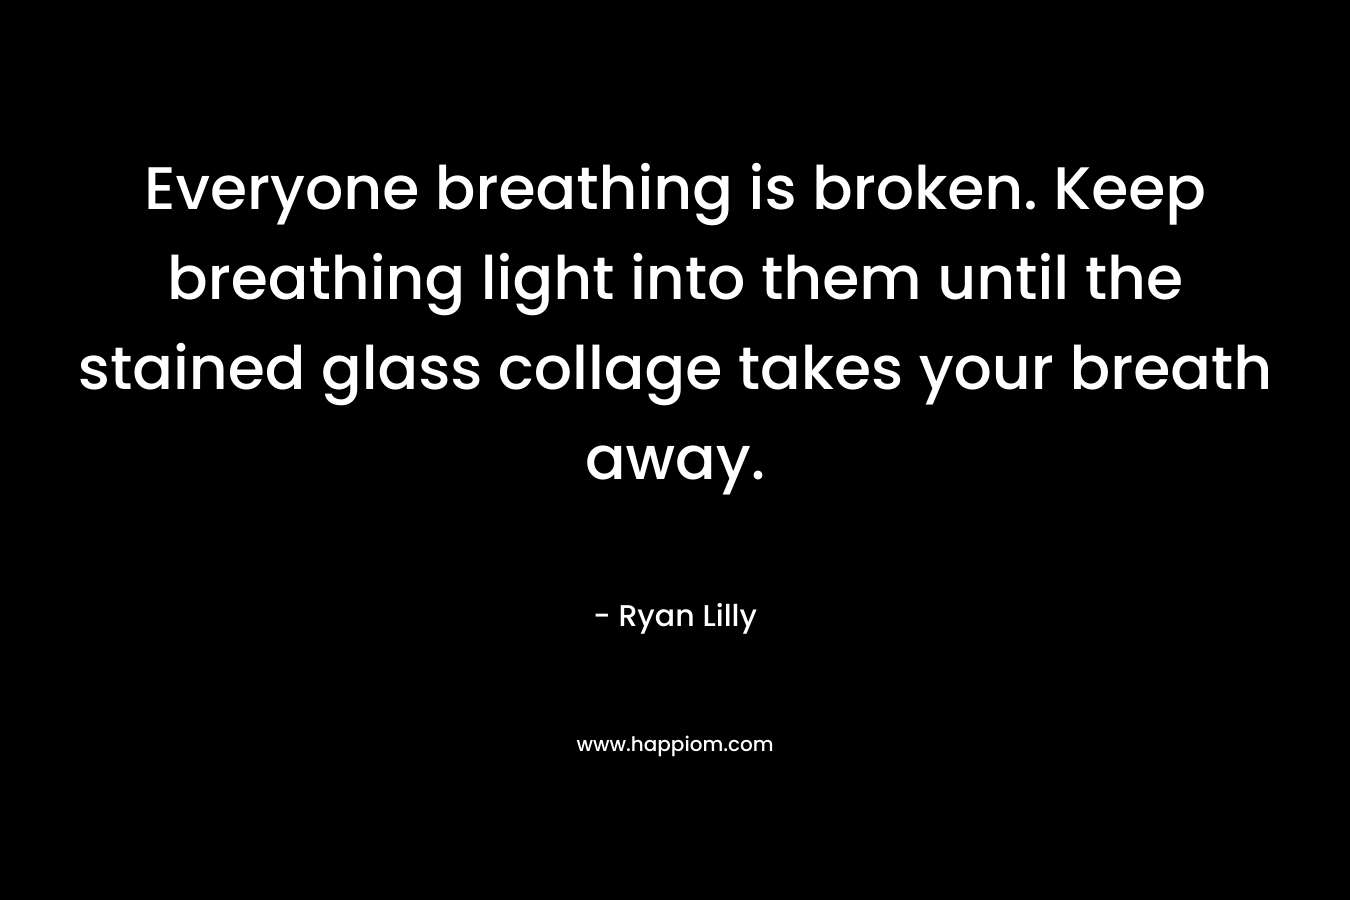 Everyone breathing is broken. Keep breathing light into them until the stained glass collage takes your breath away.